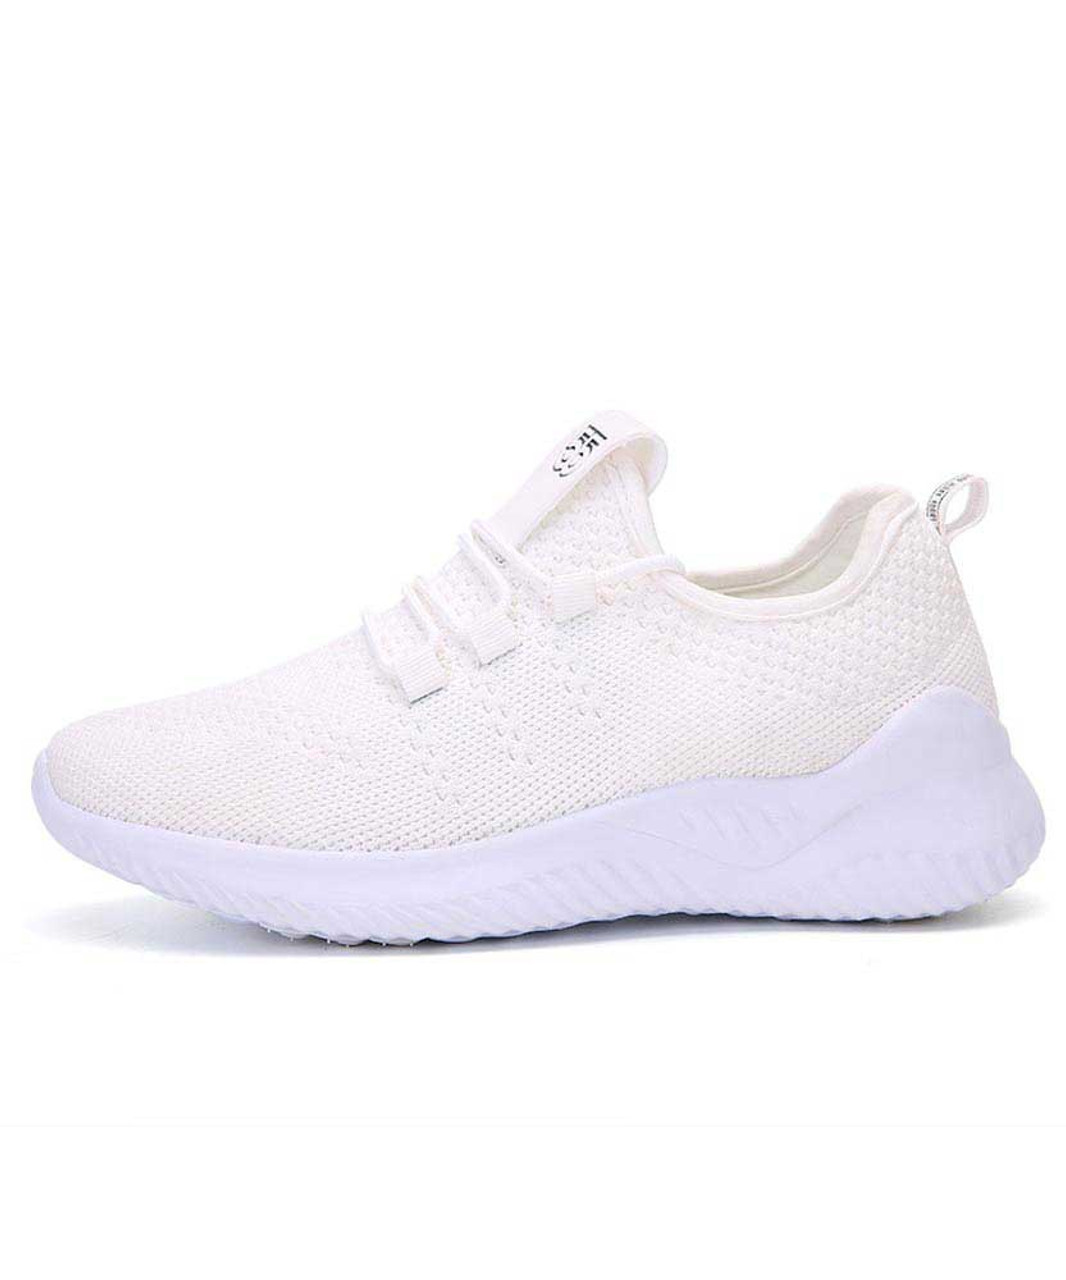 White number 55 print flyknit casual shoe sneaker | Womens sneakers ...